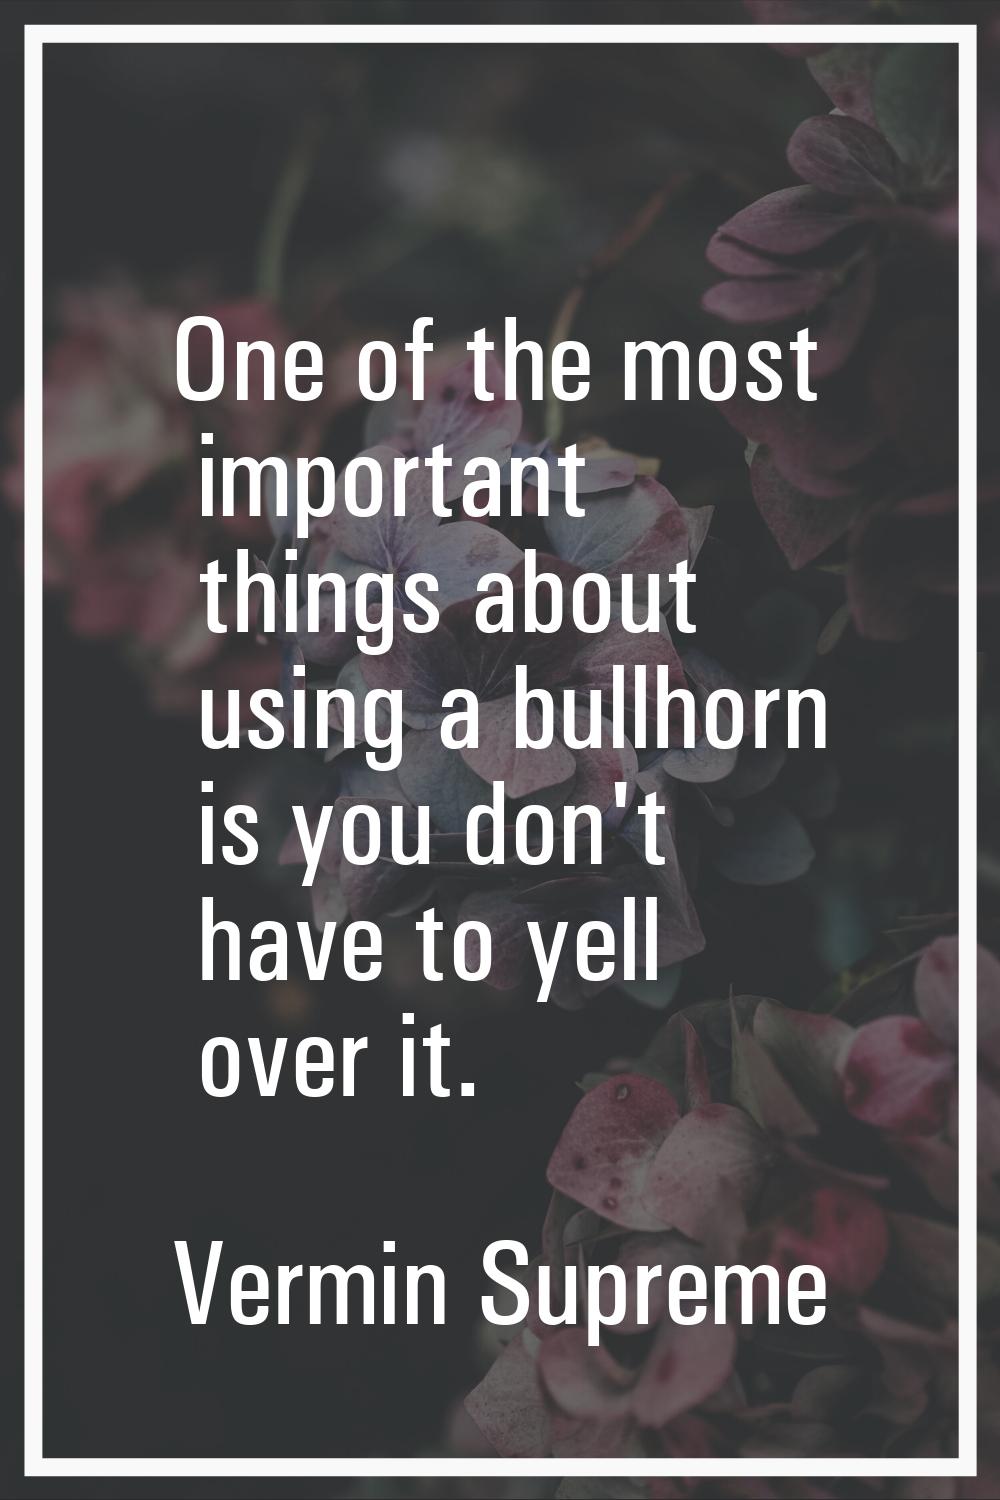 One of the most important things about using a bullhorn is you don't have to yell over it.